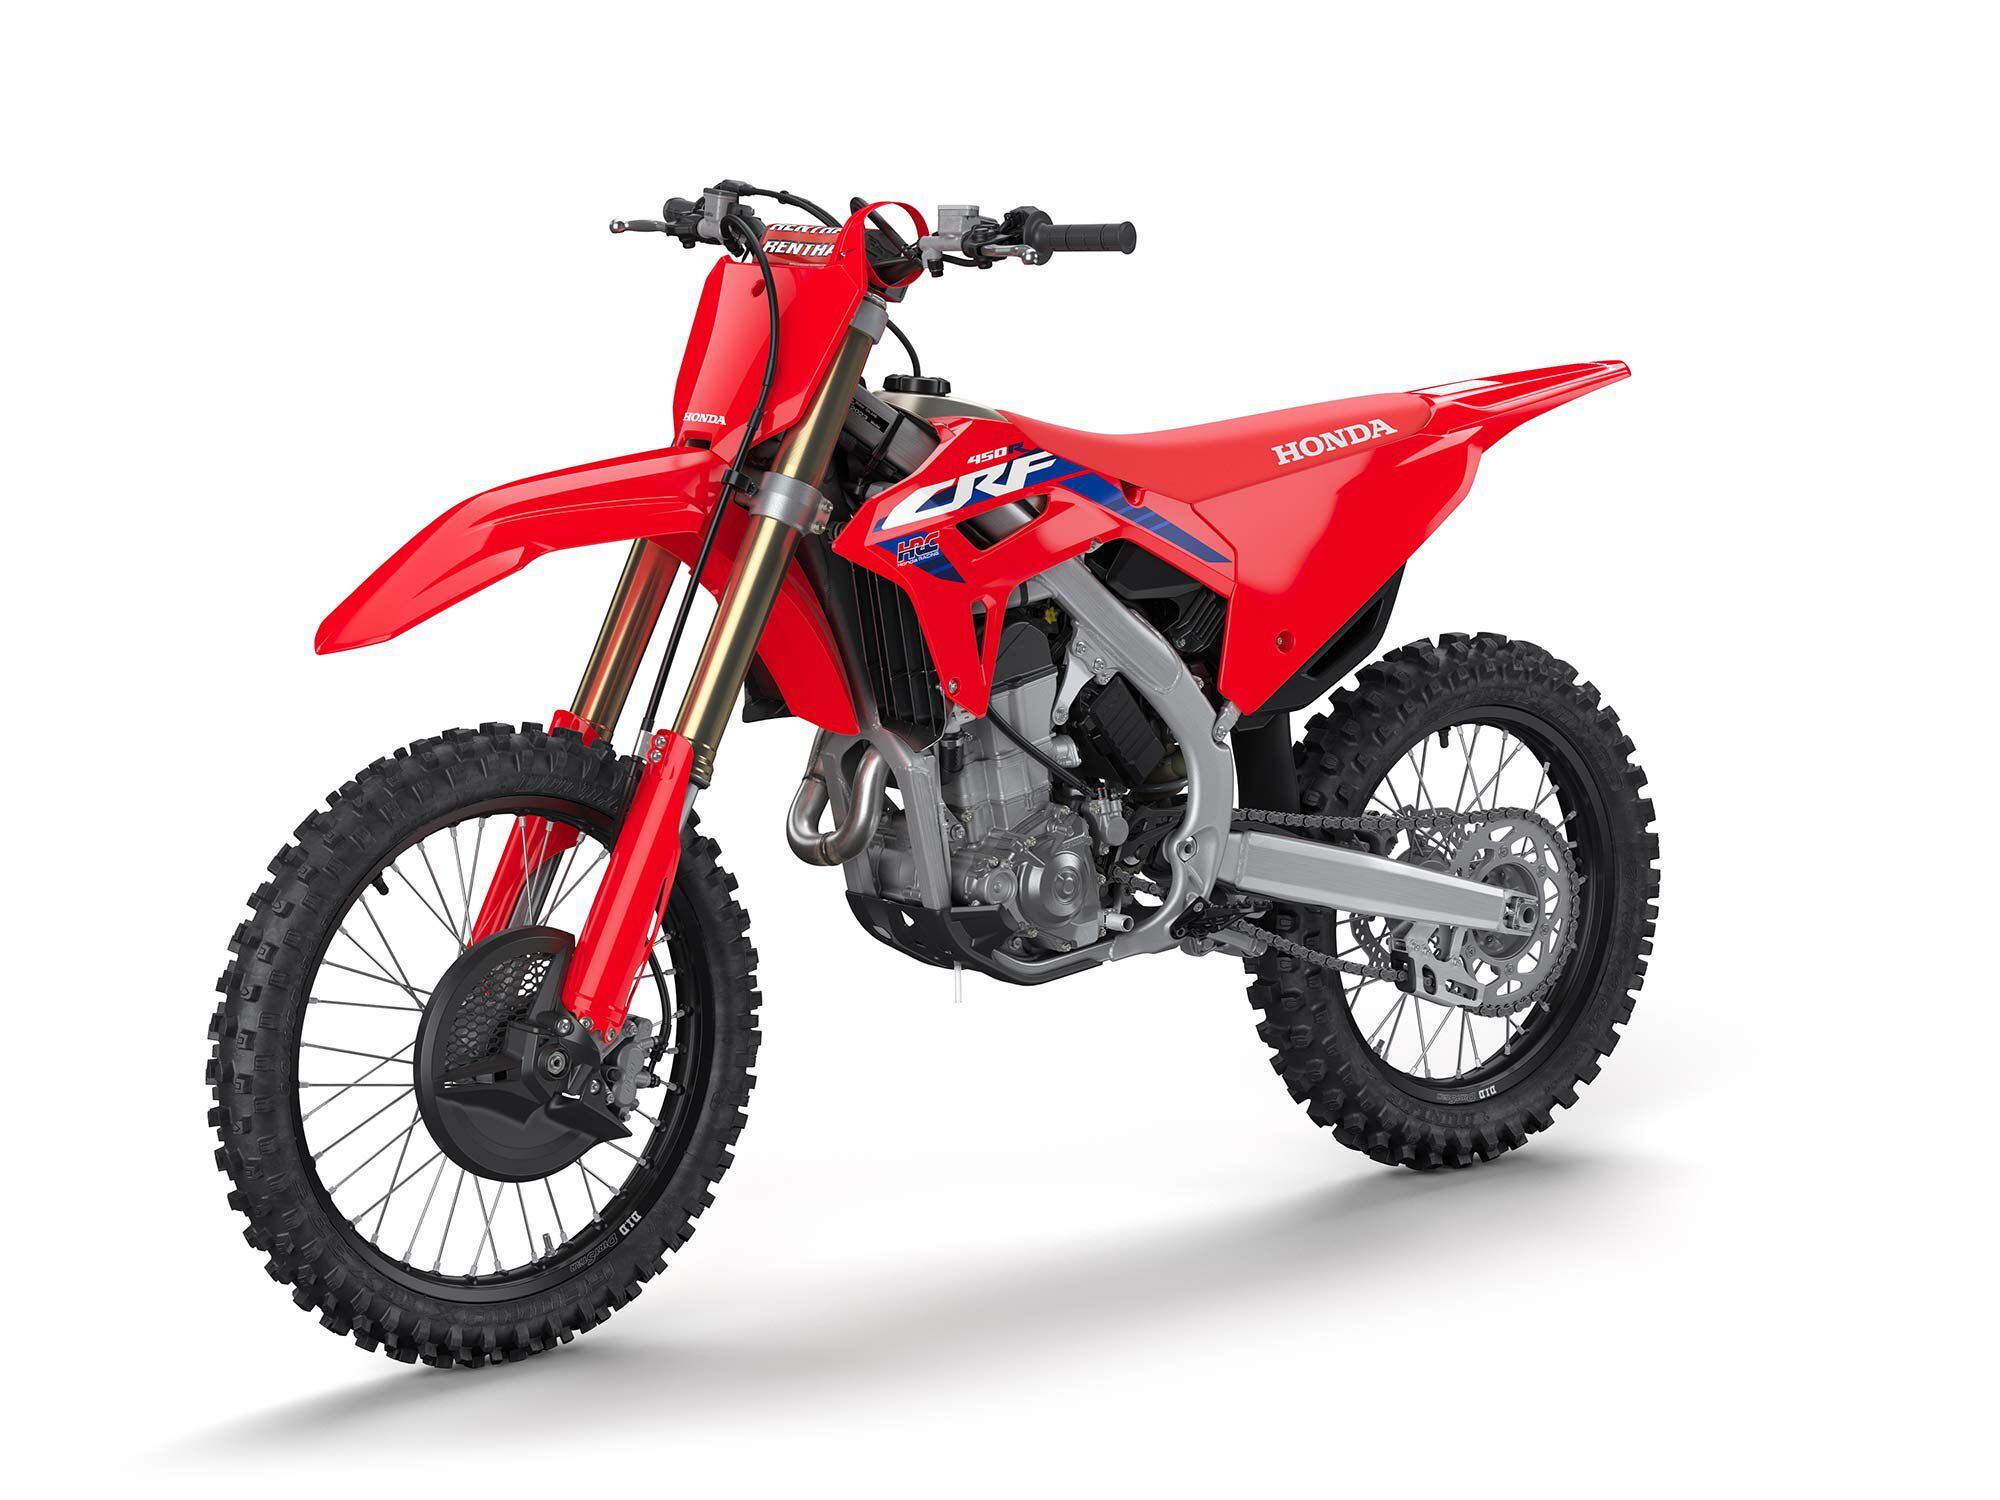 The 2023 CRF450R is priced at $ 9,599.